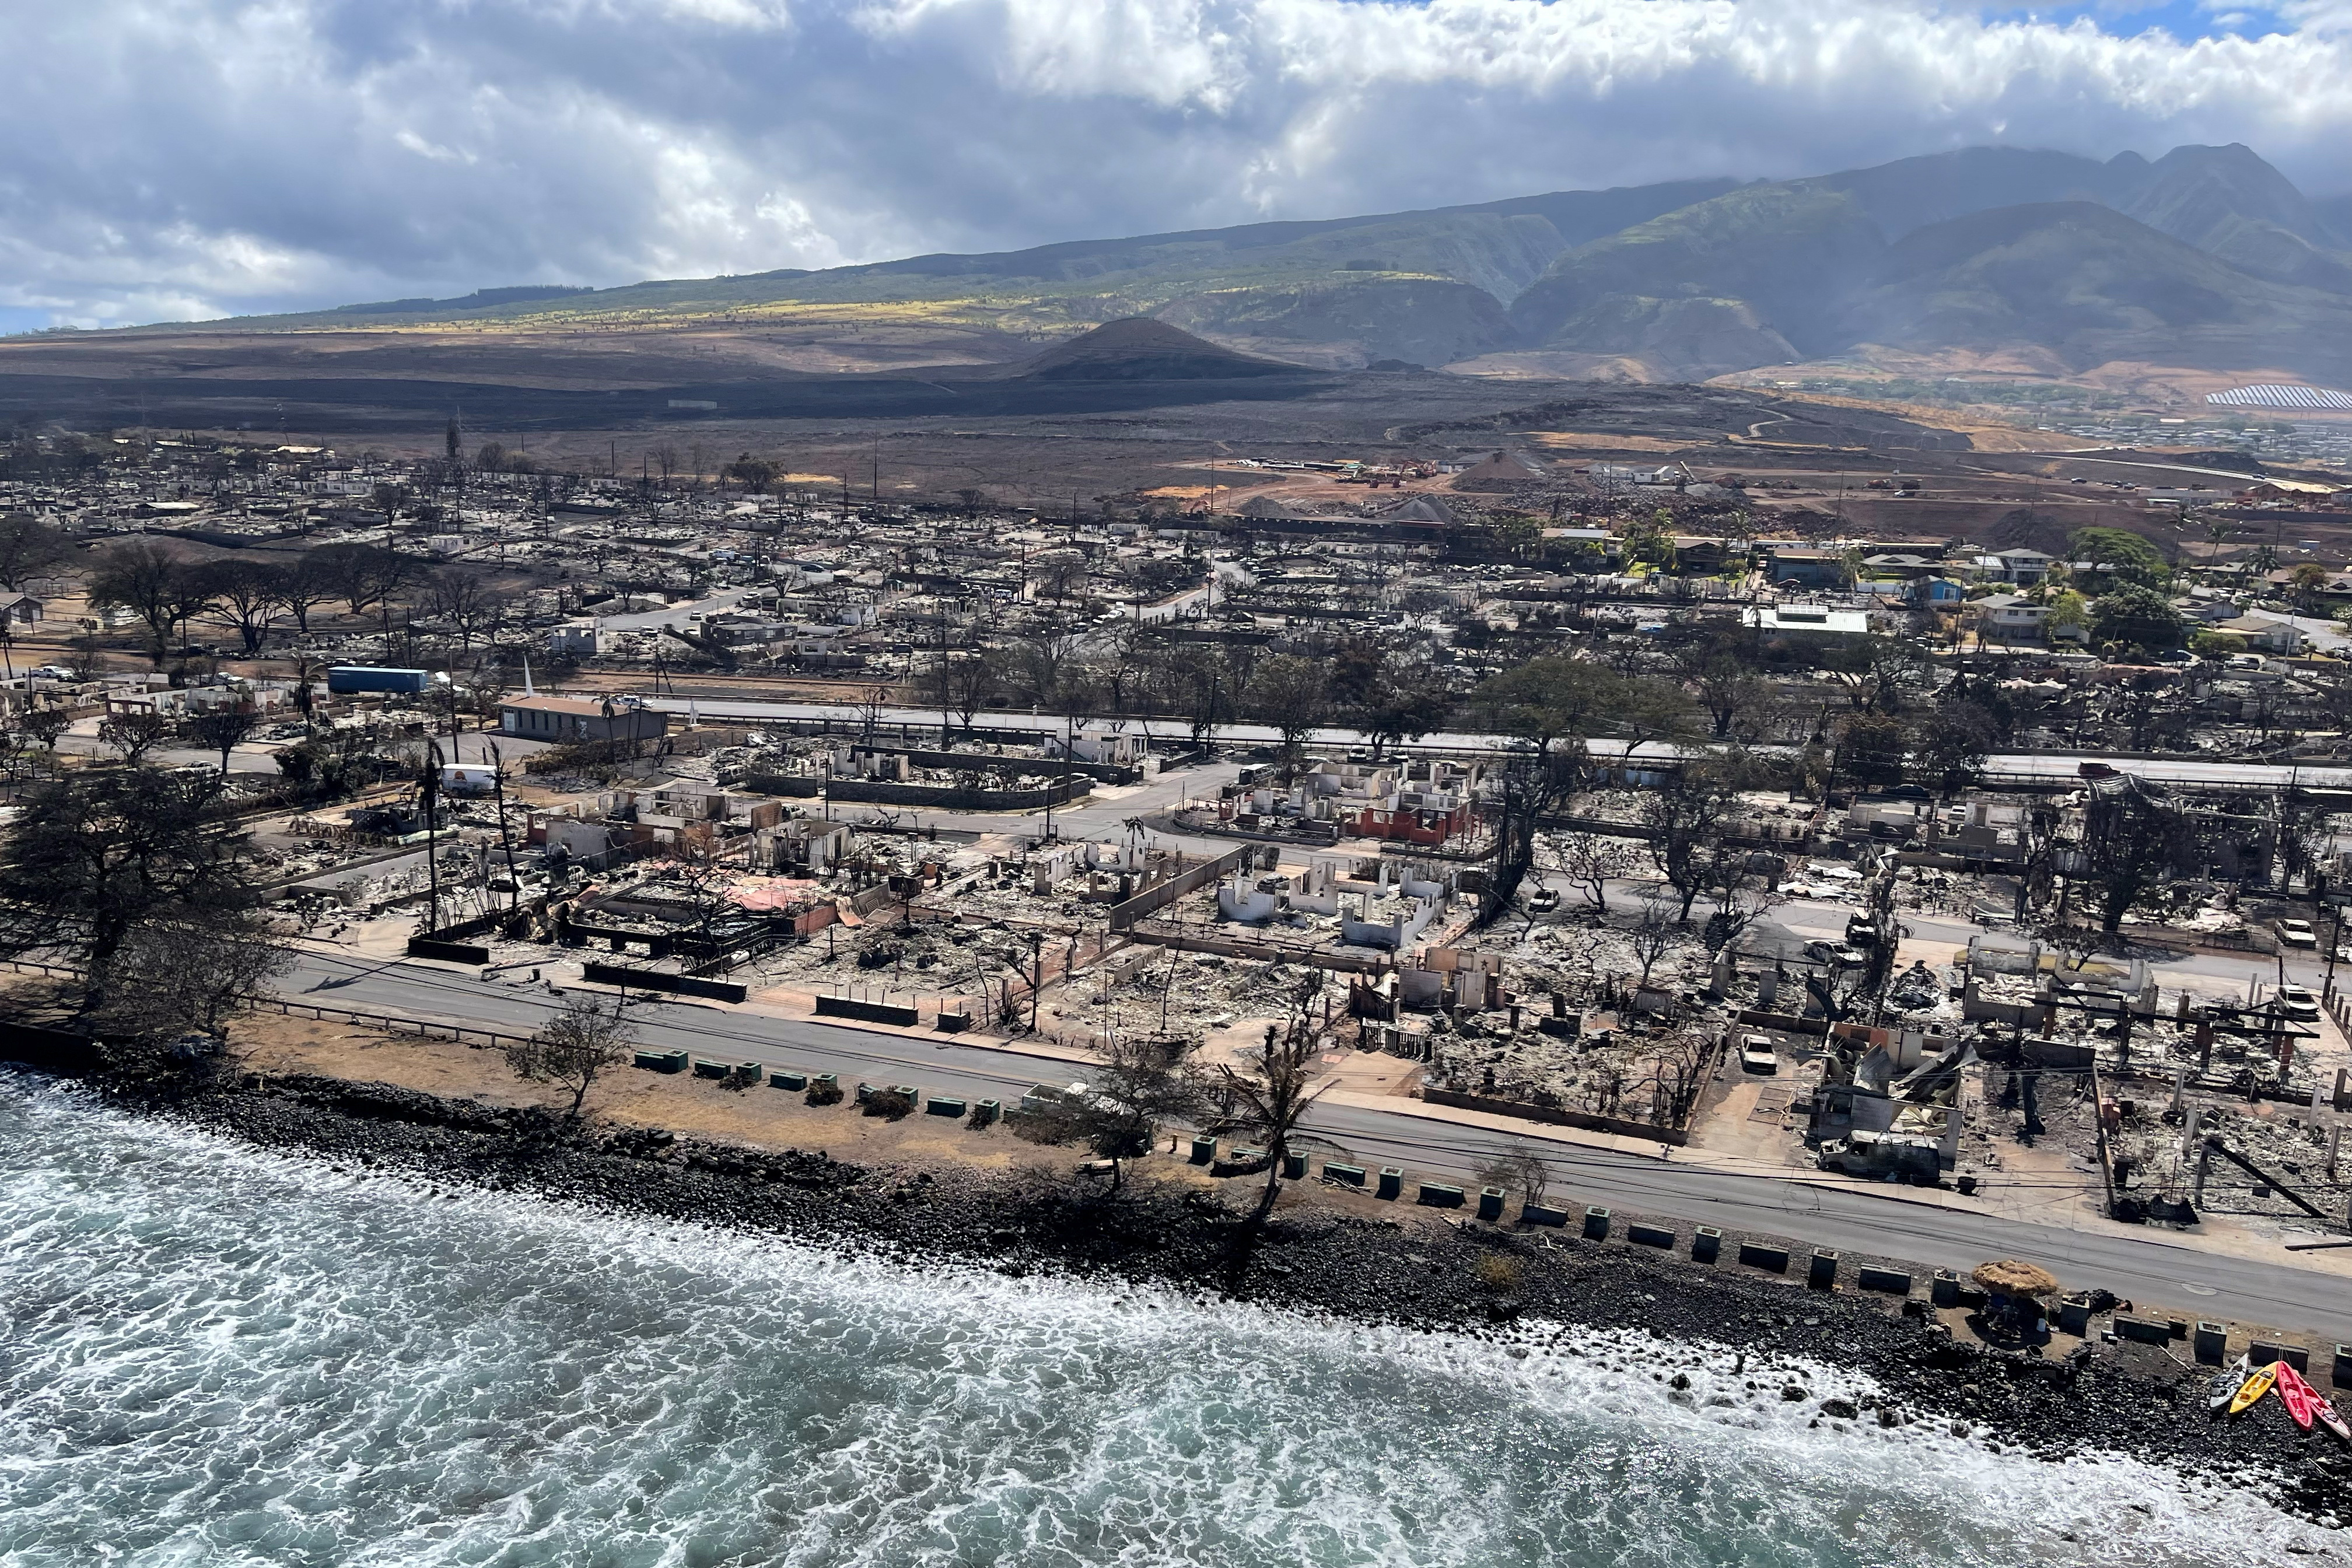 The shells of burned houses and buildings are left after wildfires in Lahaina